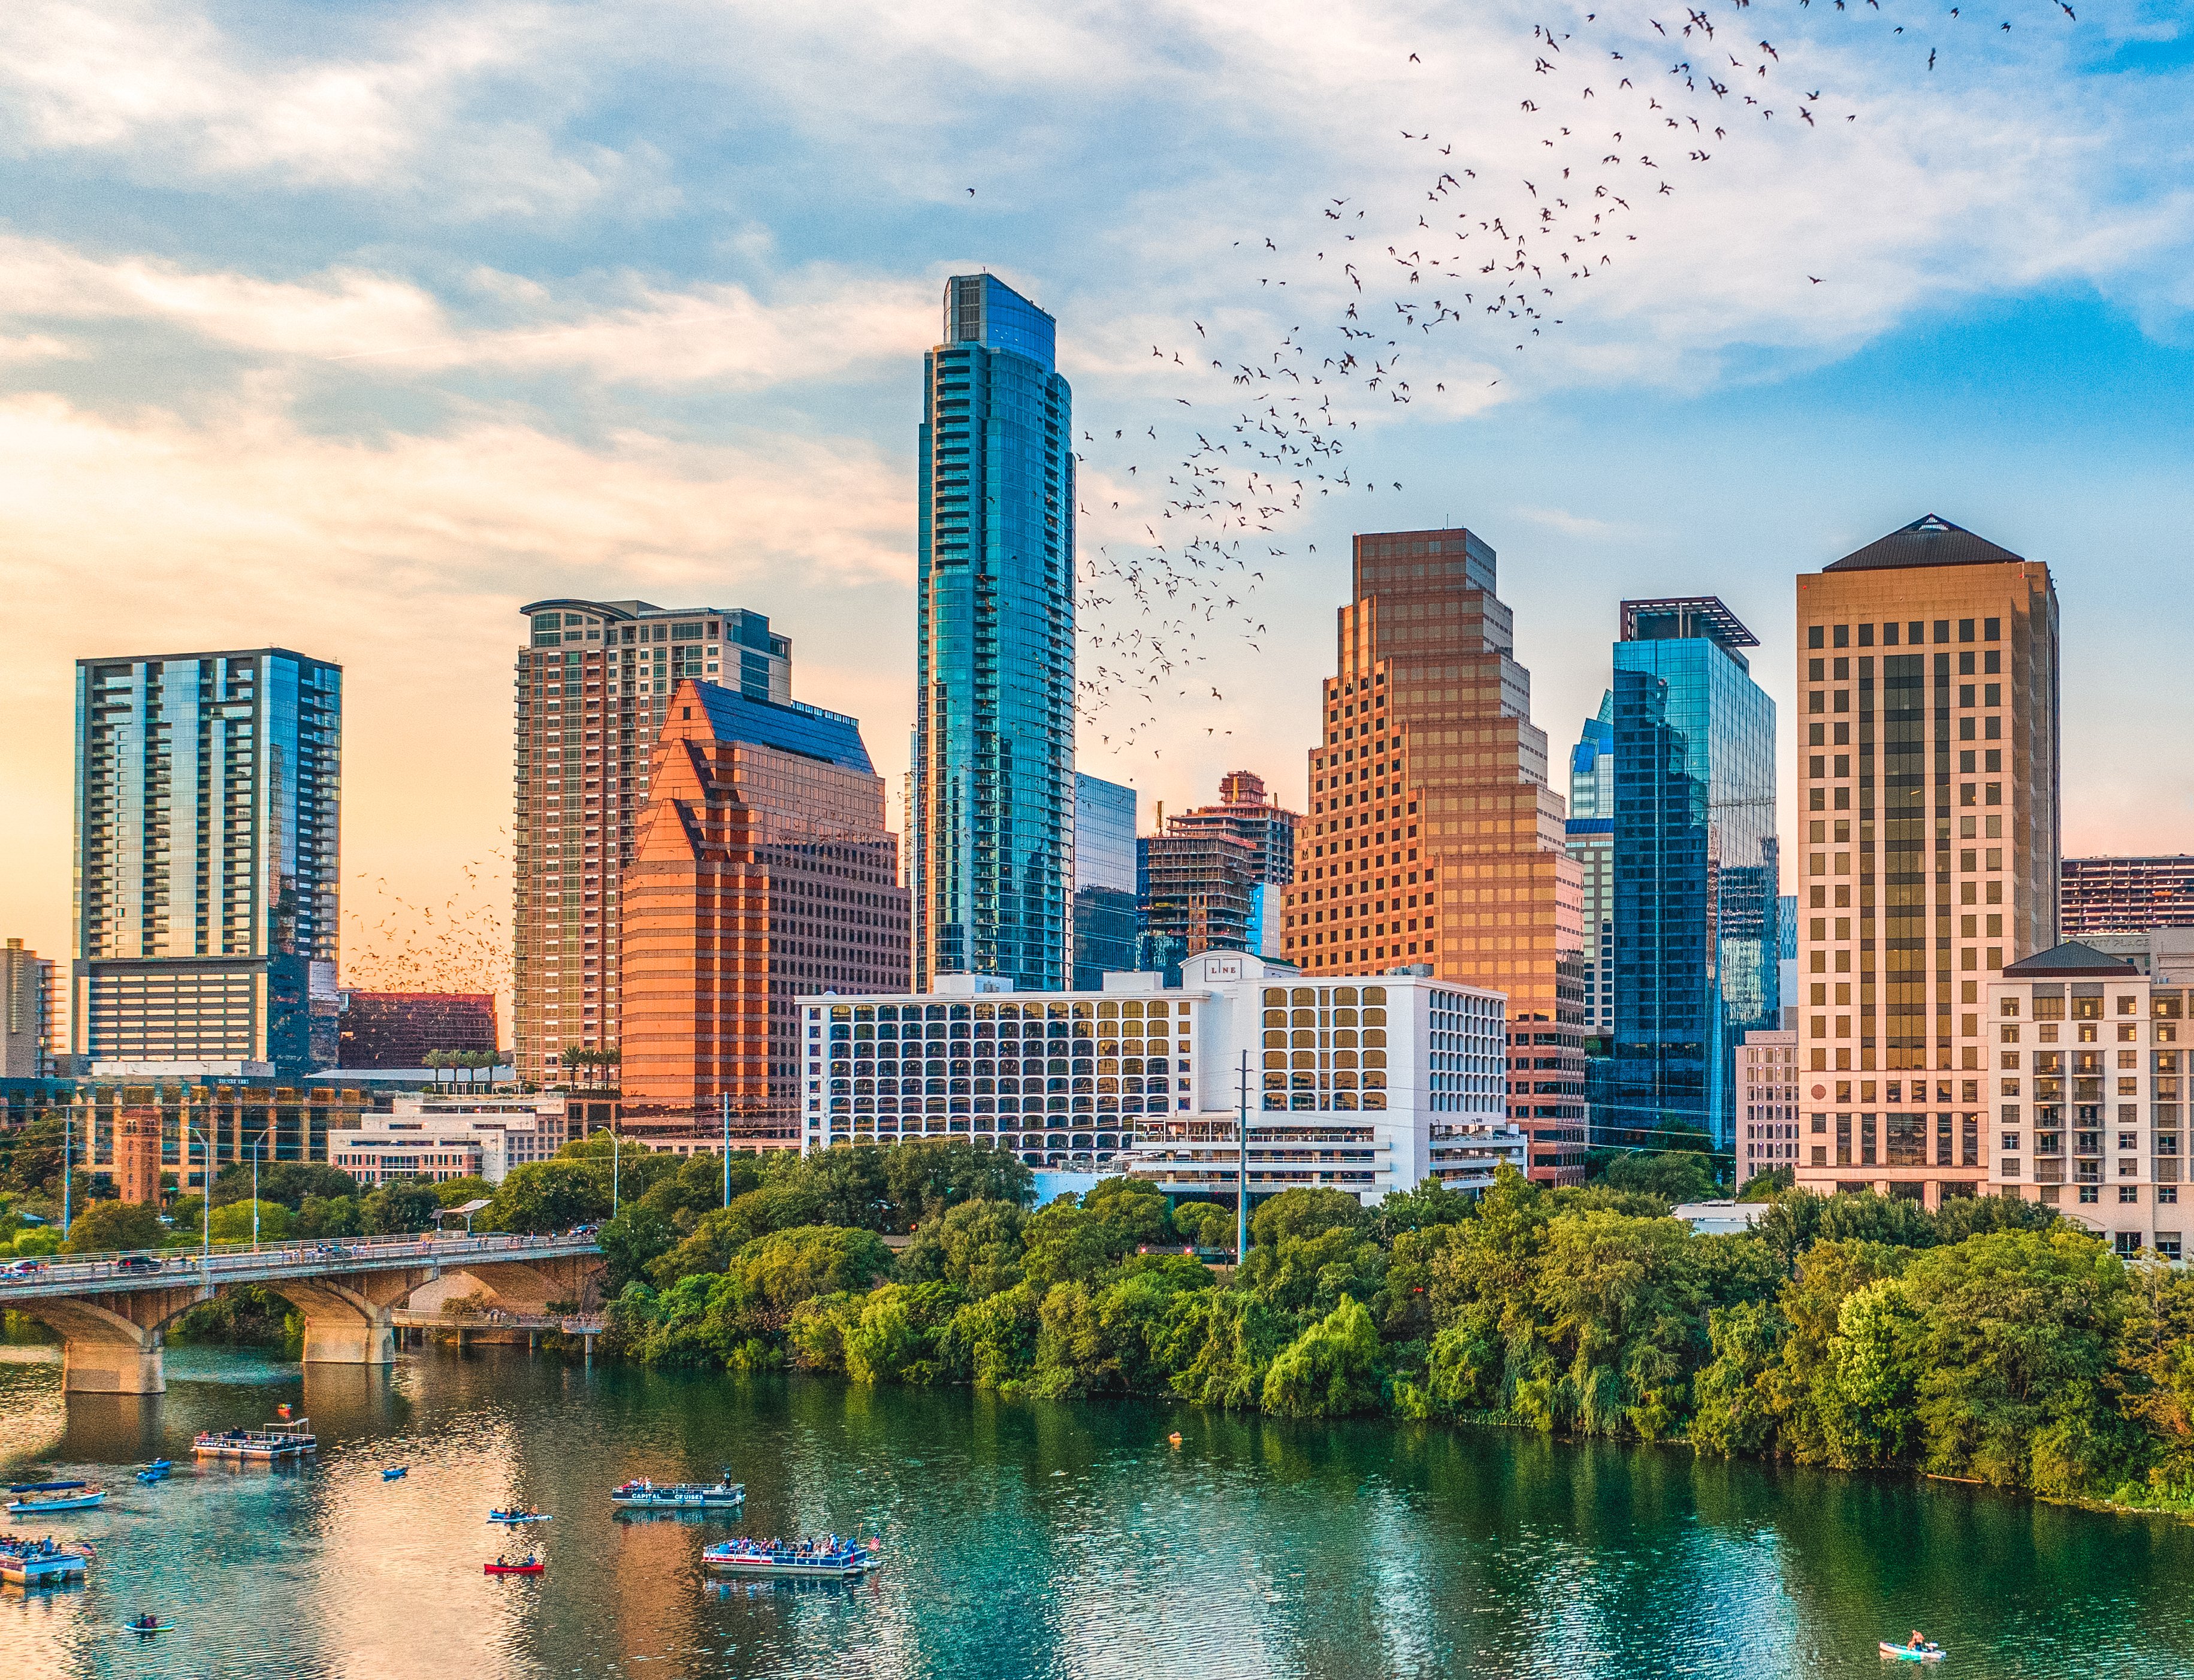 Top 20 Best Cities to Live in the USA - Austin, Texas